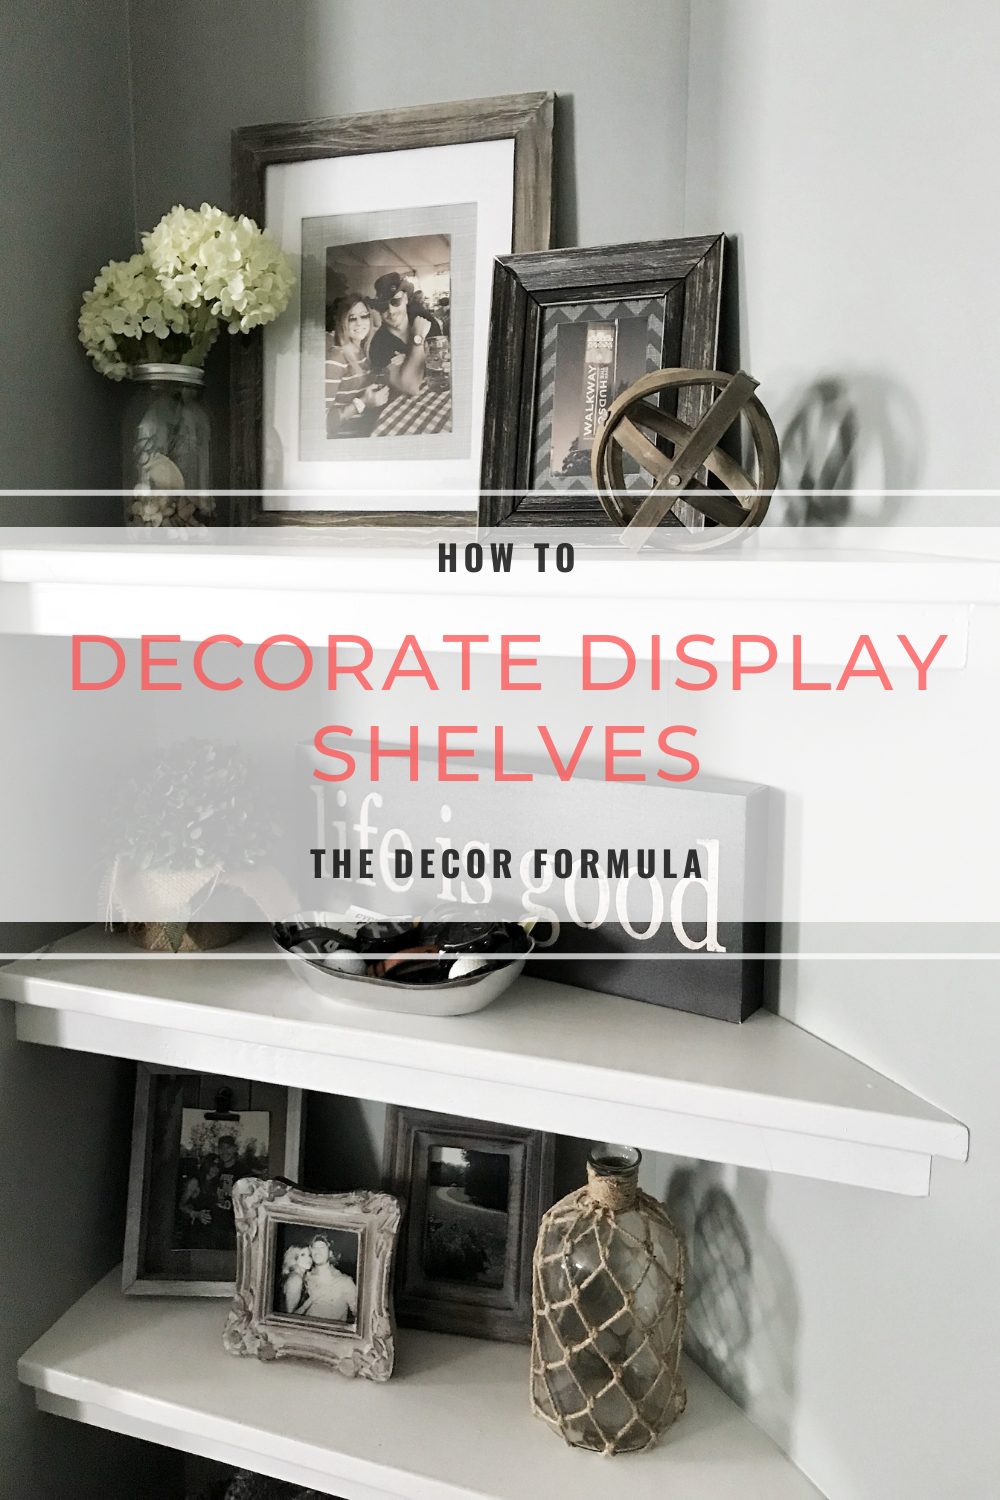 How to Decorate Display Shelves — The Decor Formula